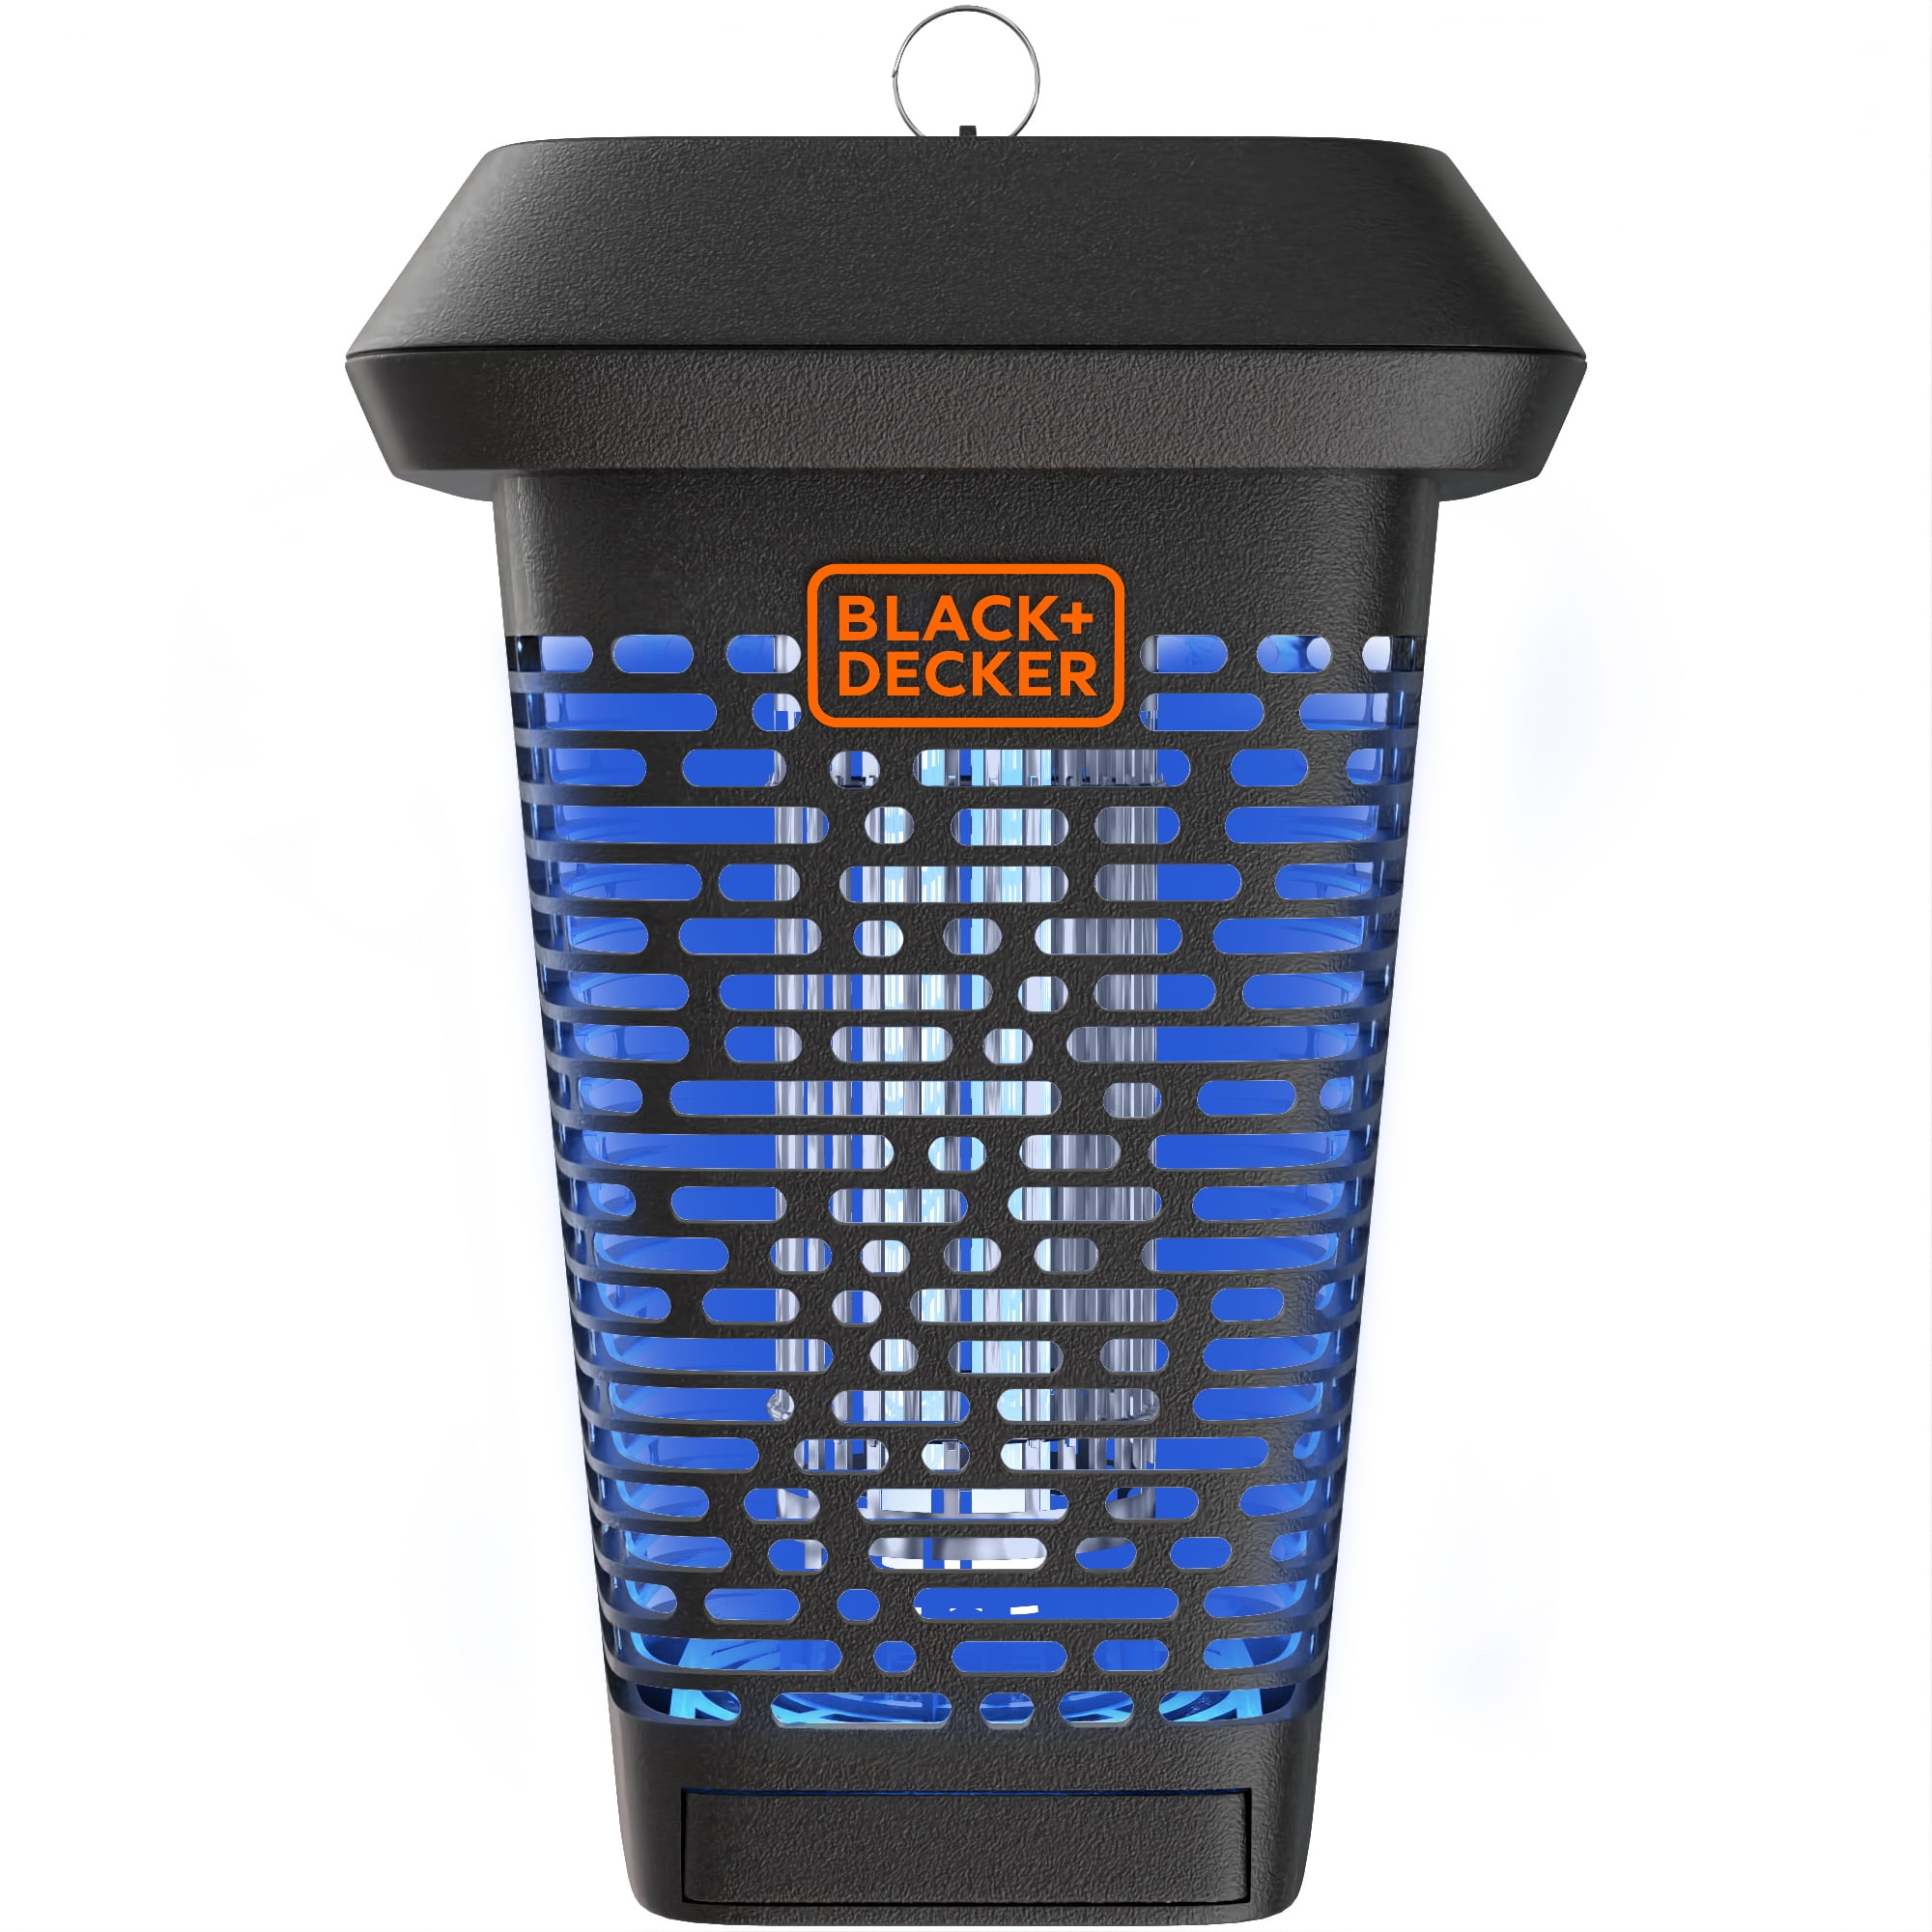  BLACK+DECKER Bug Zapper, Electric UV Insect Killer& Catcher  for Flies, Gnats, Mosquitoes, & Other Flying Pests